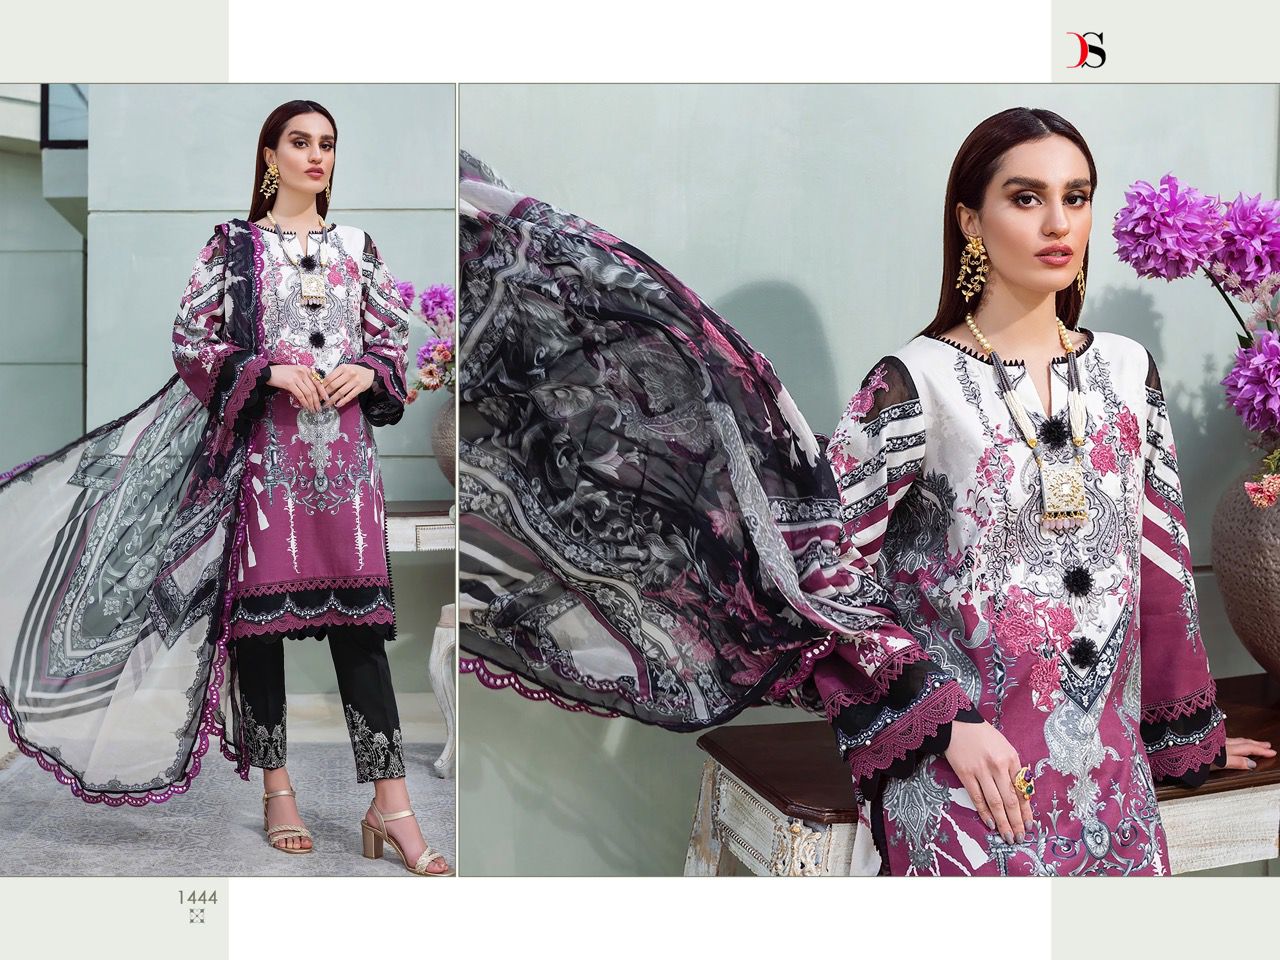 deepsy suit Bliss lawn 22 cotton attrective print and look salwar suit with chiffon dupatta catalog